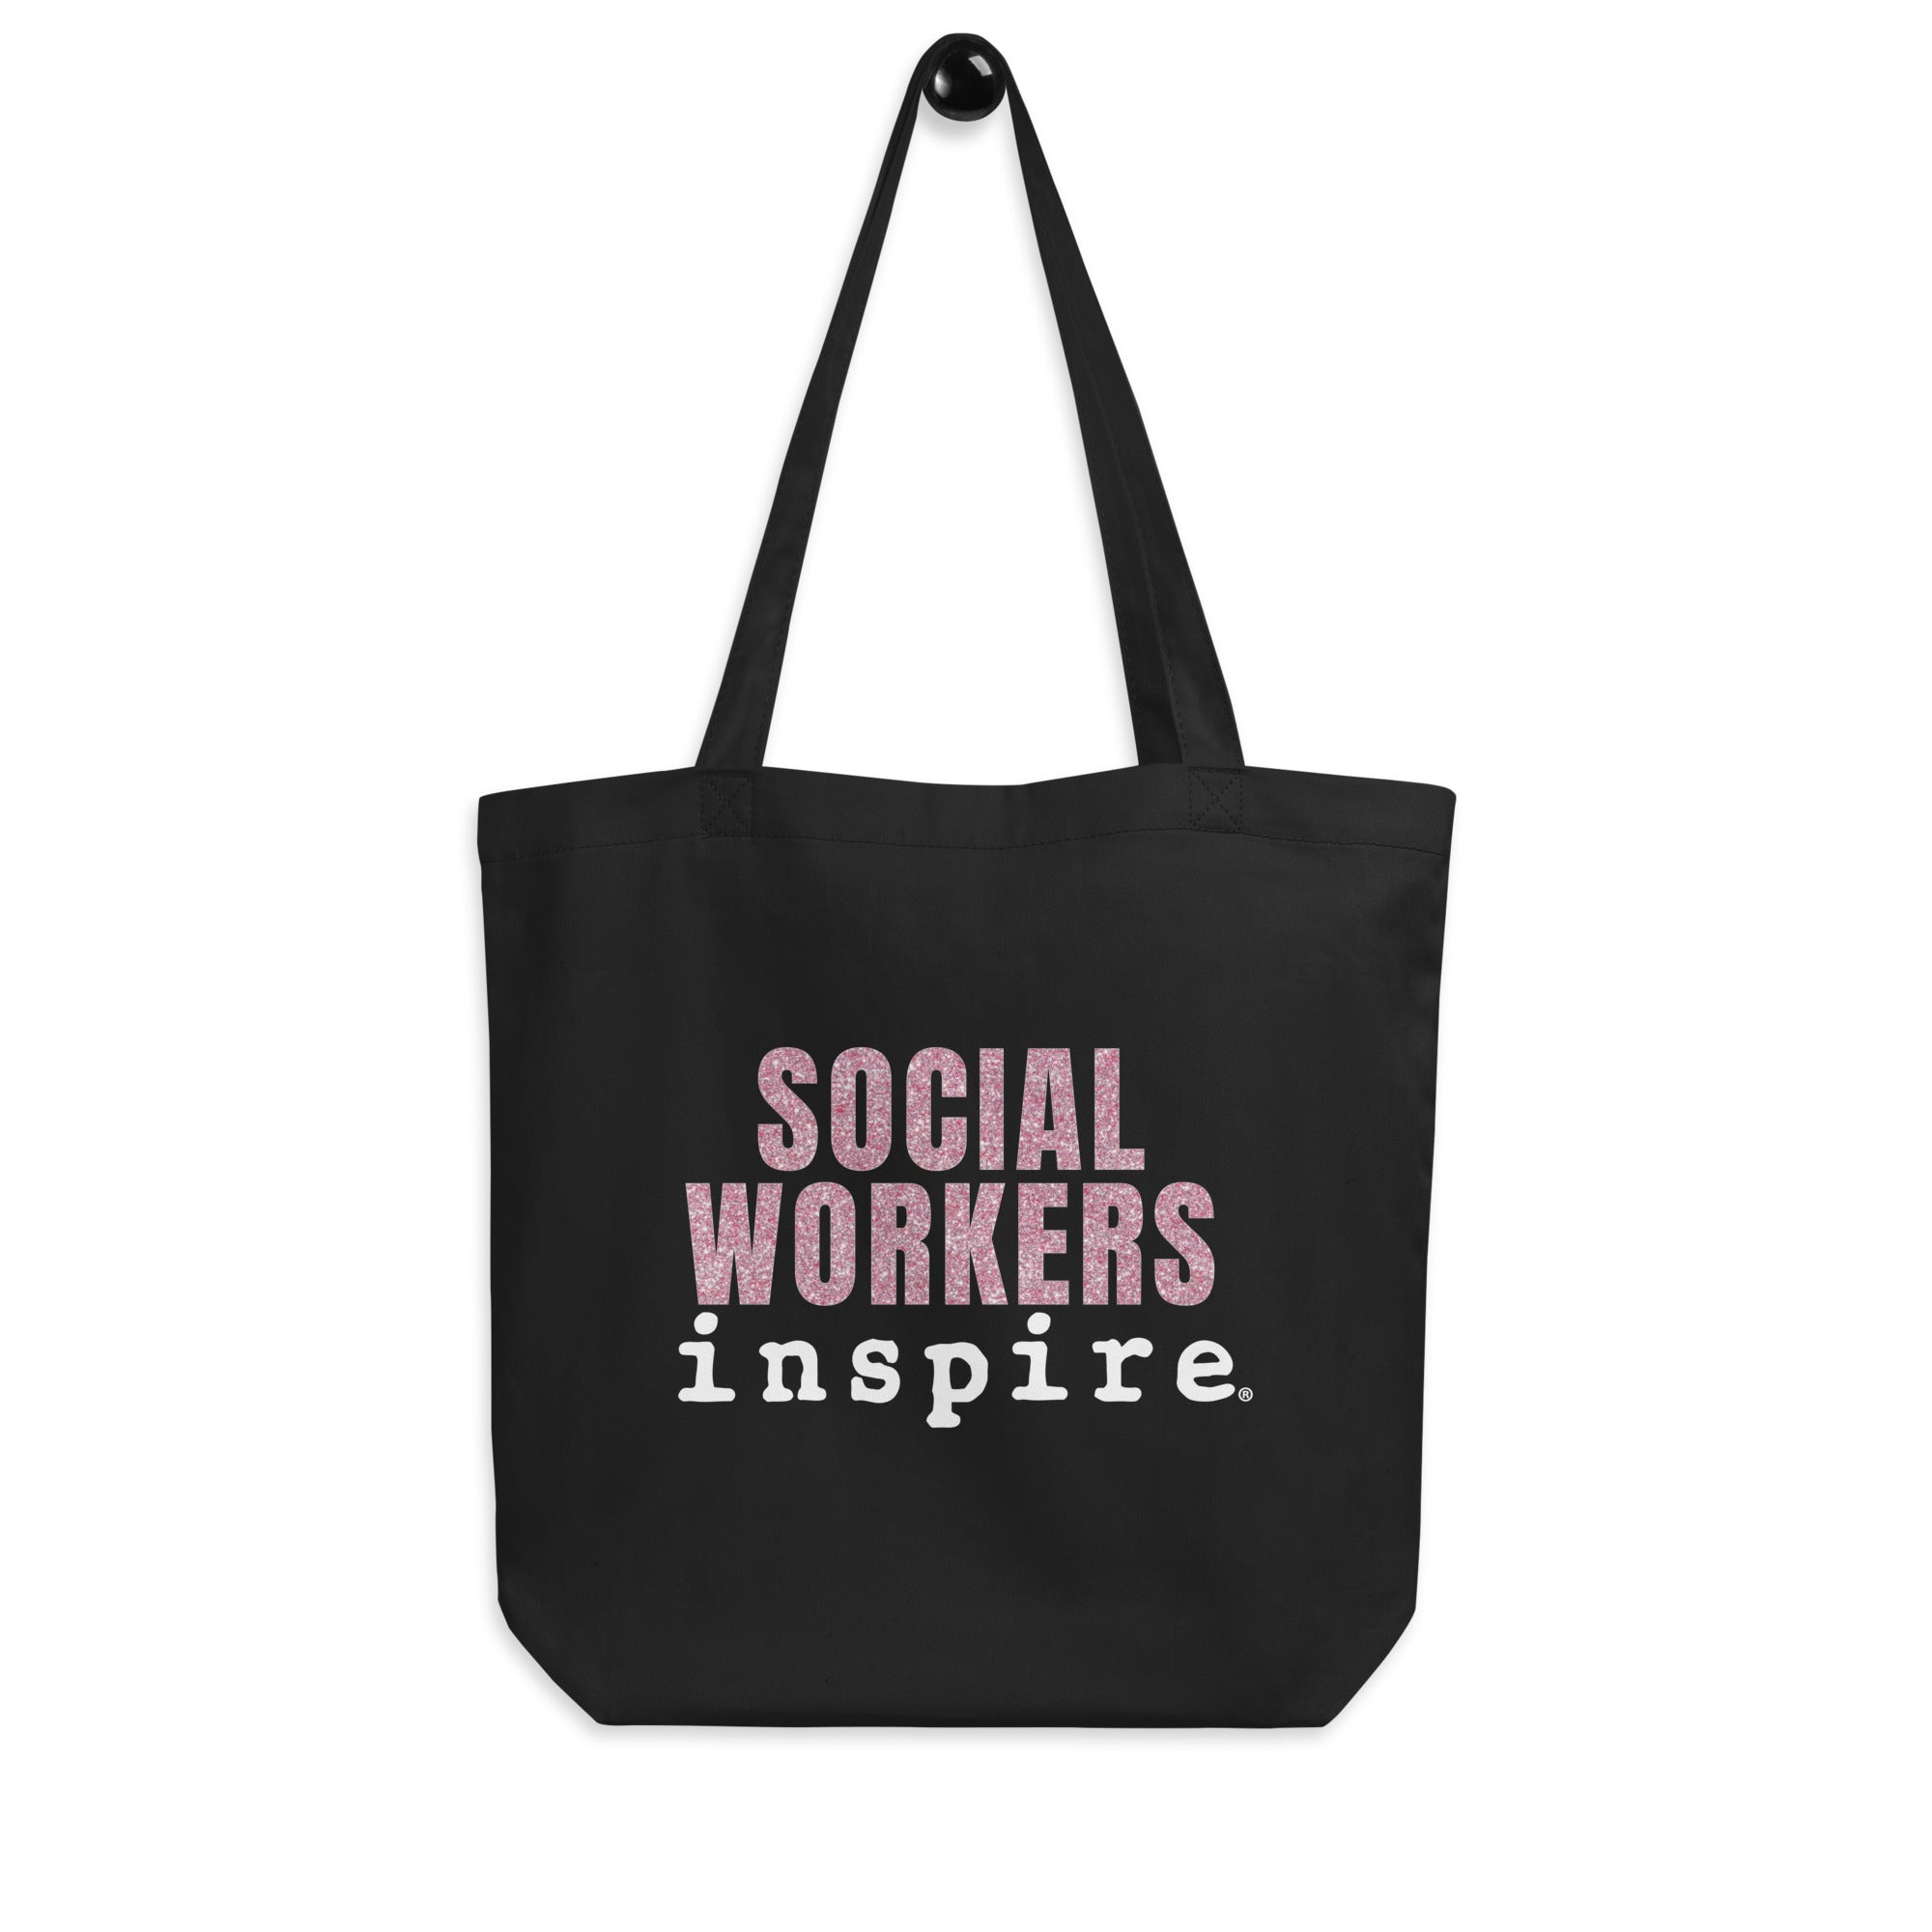 inspire Social Workers Eco Tote Bag